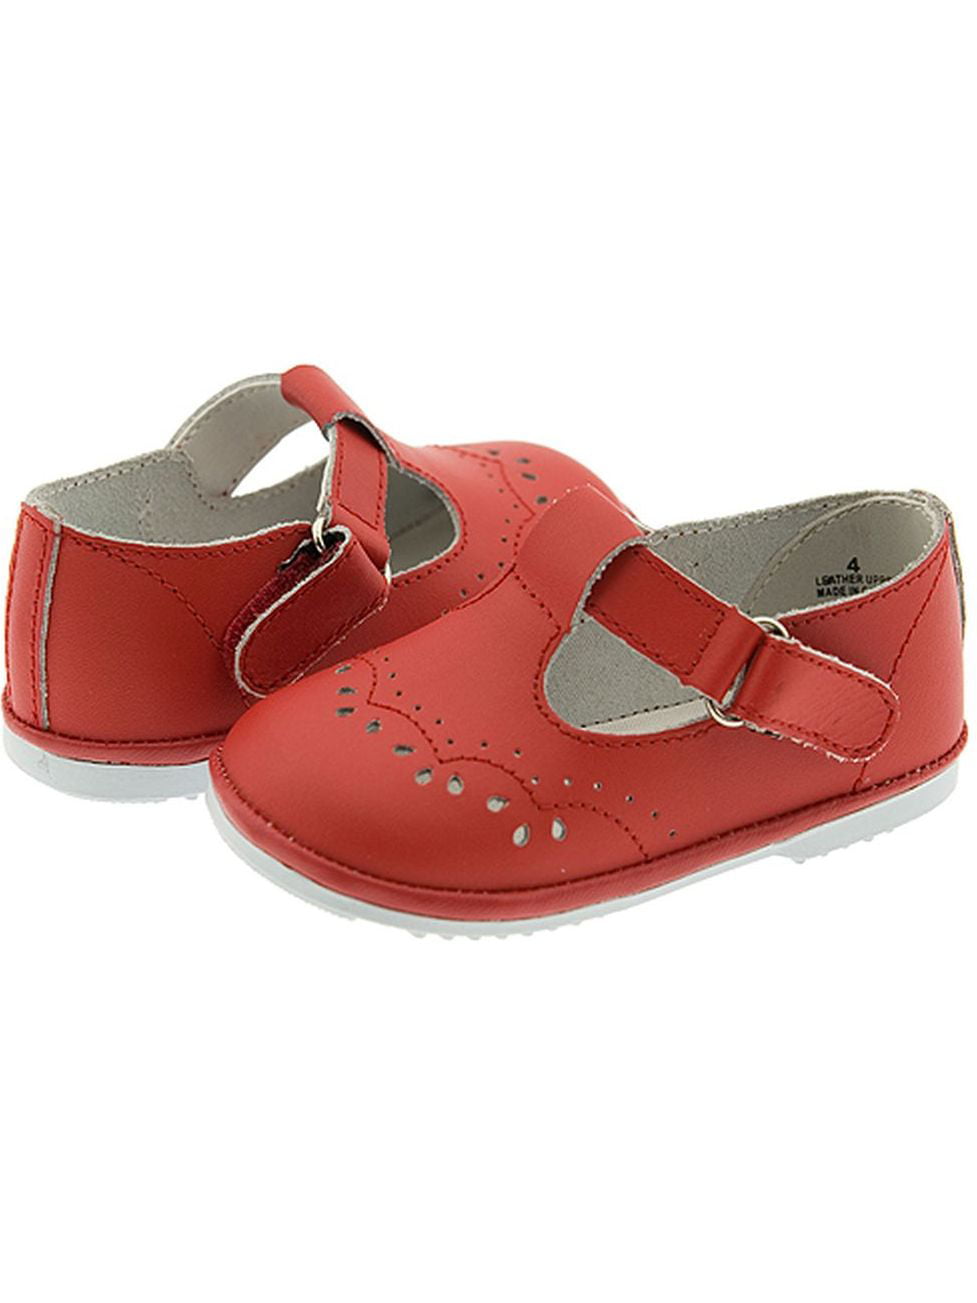 girls red shoes size 1